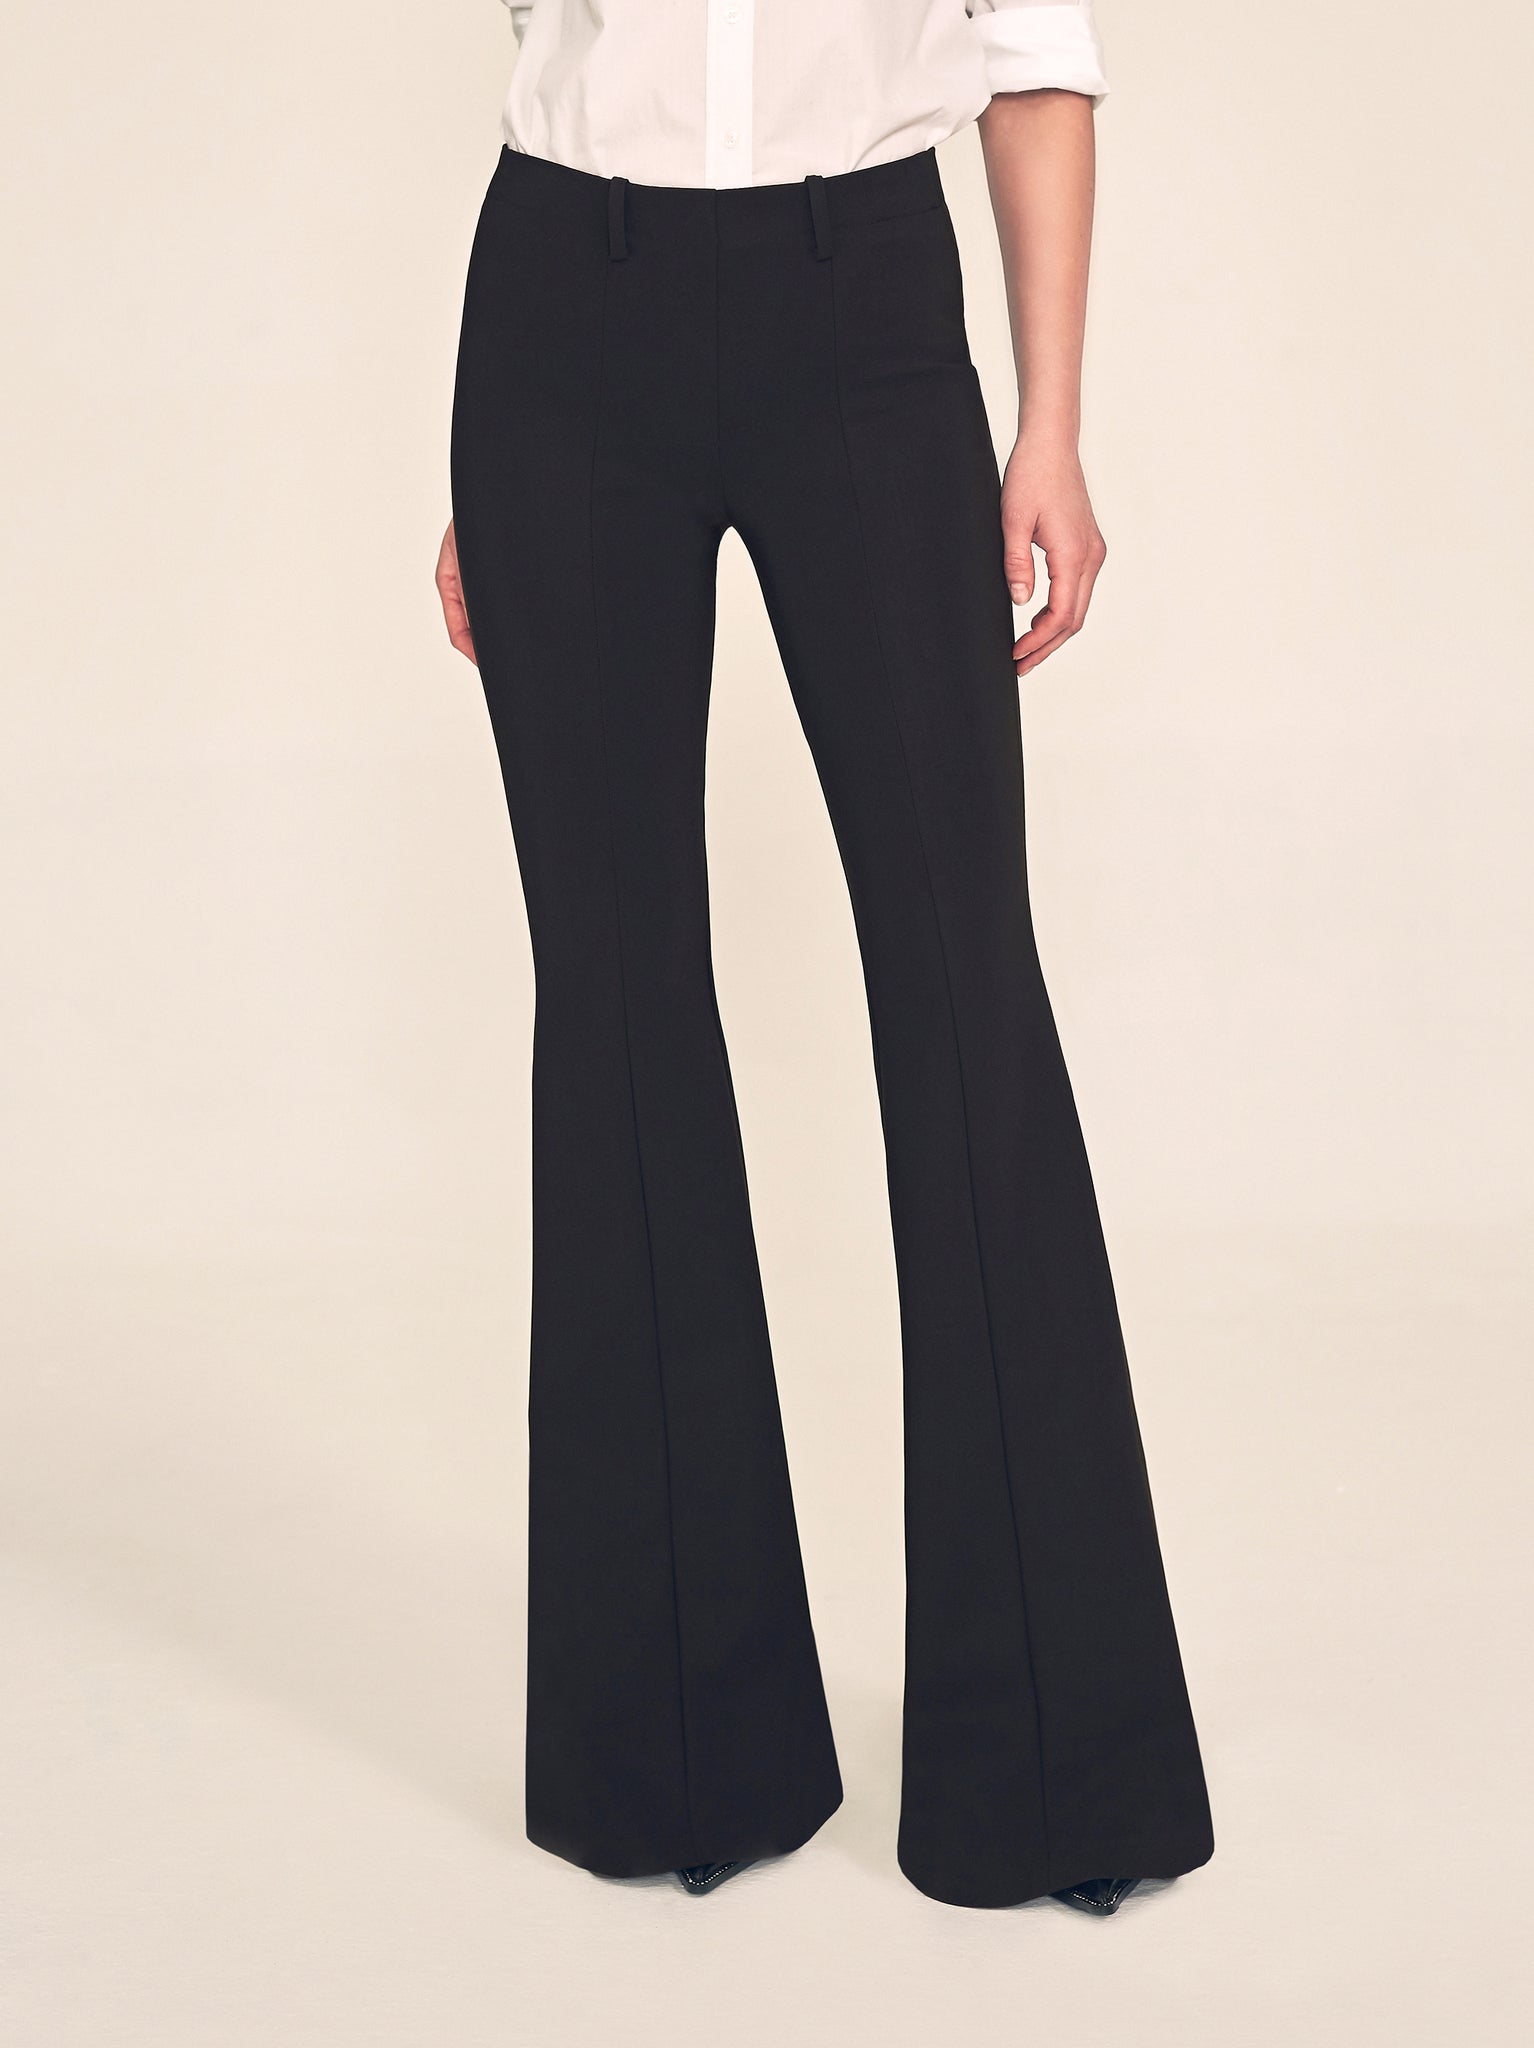 Perfect Pants For Your Every Day – PAIRE Los Angeles